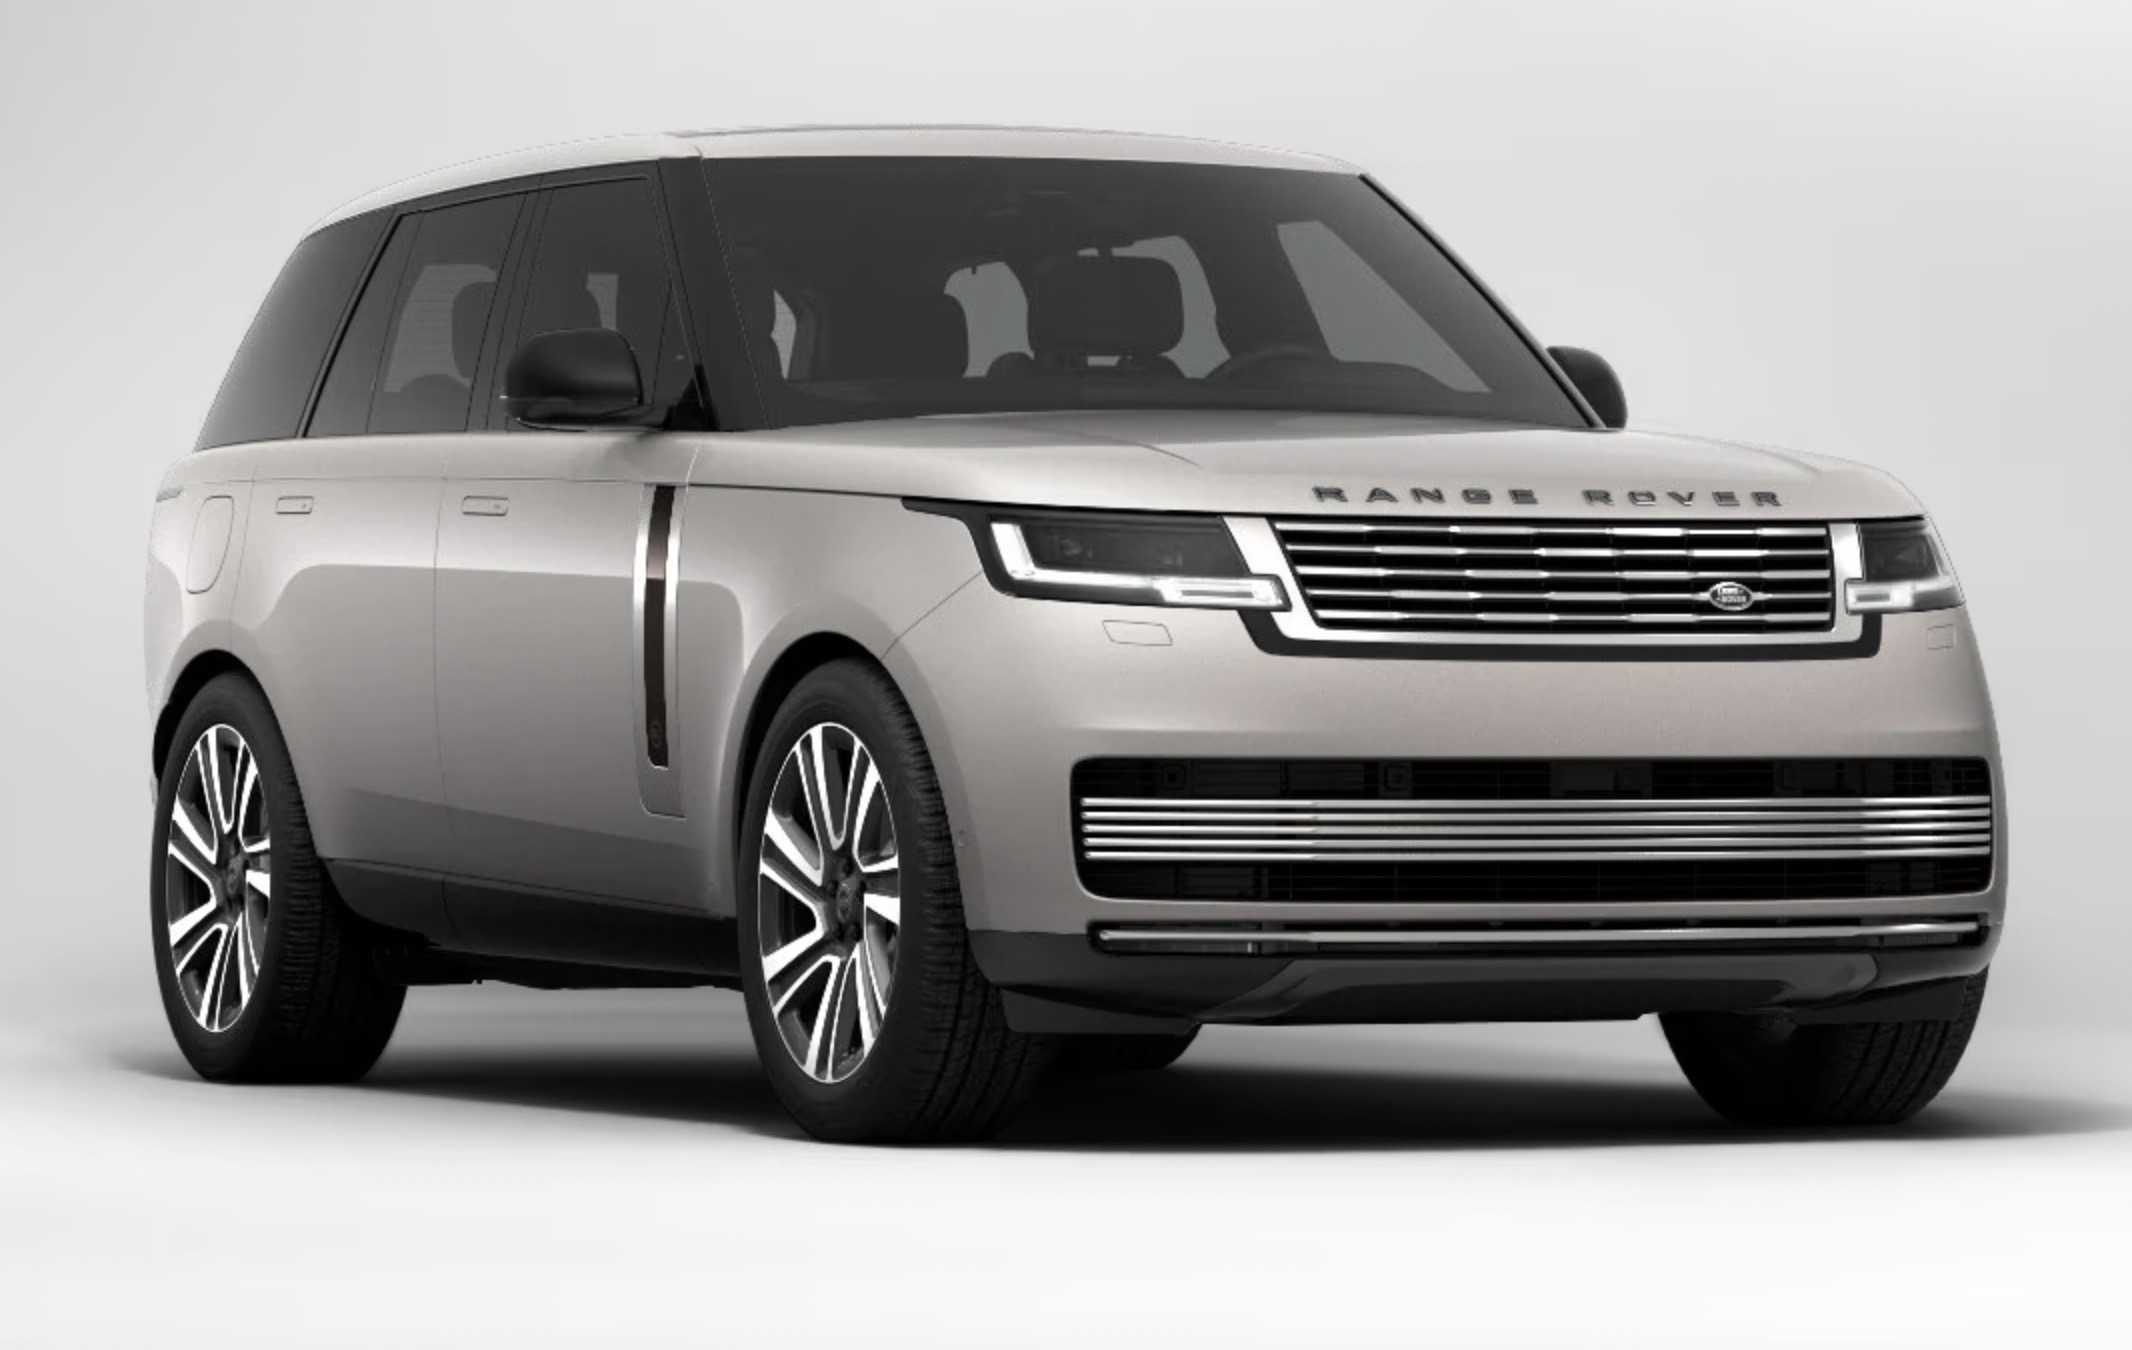 Used Land Rover Range Rover 2018 Cars For Sale | AutoTrader UK